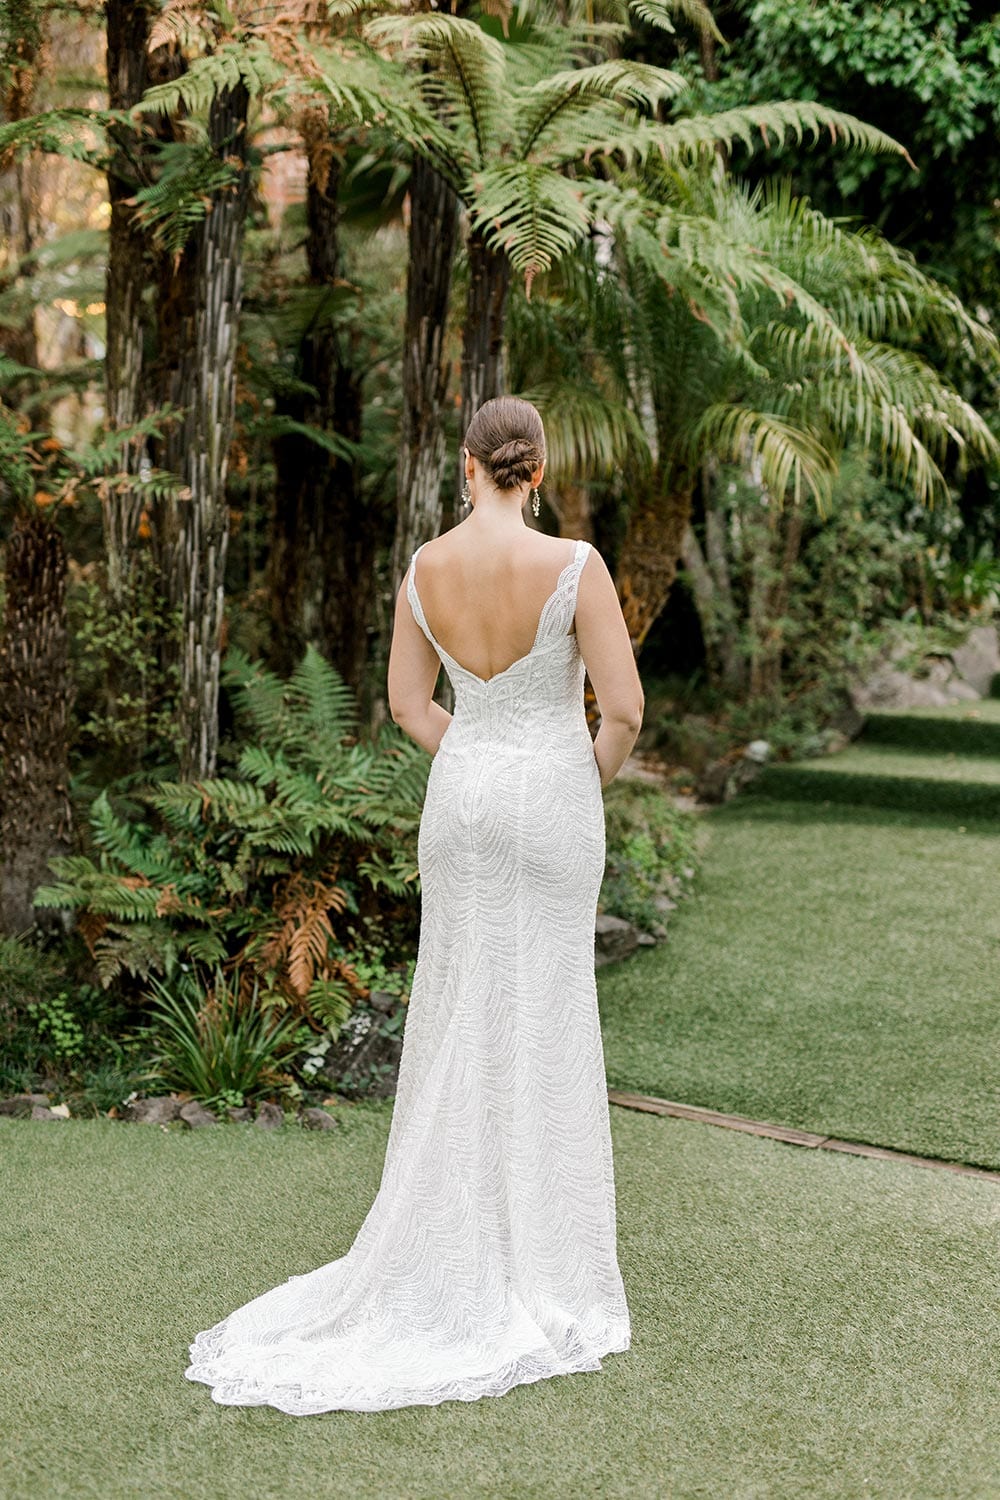 Juliette Wedding Dress from Vinka Design. Flattering stretch fitted lace wedding dress with beautiful ivory rich beading. Structured bodice provides support while remaining effortless to wear. Full length of dress from behind with train to the side. Photographed at Tui Hills.